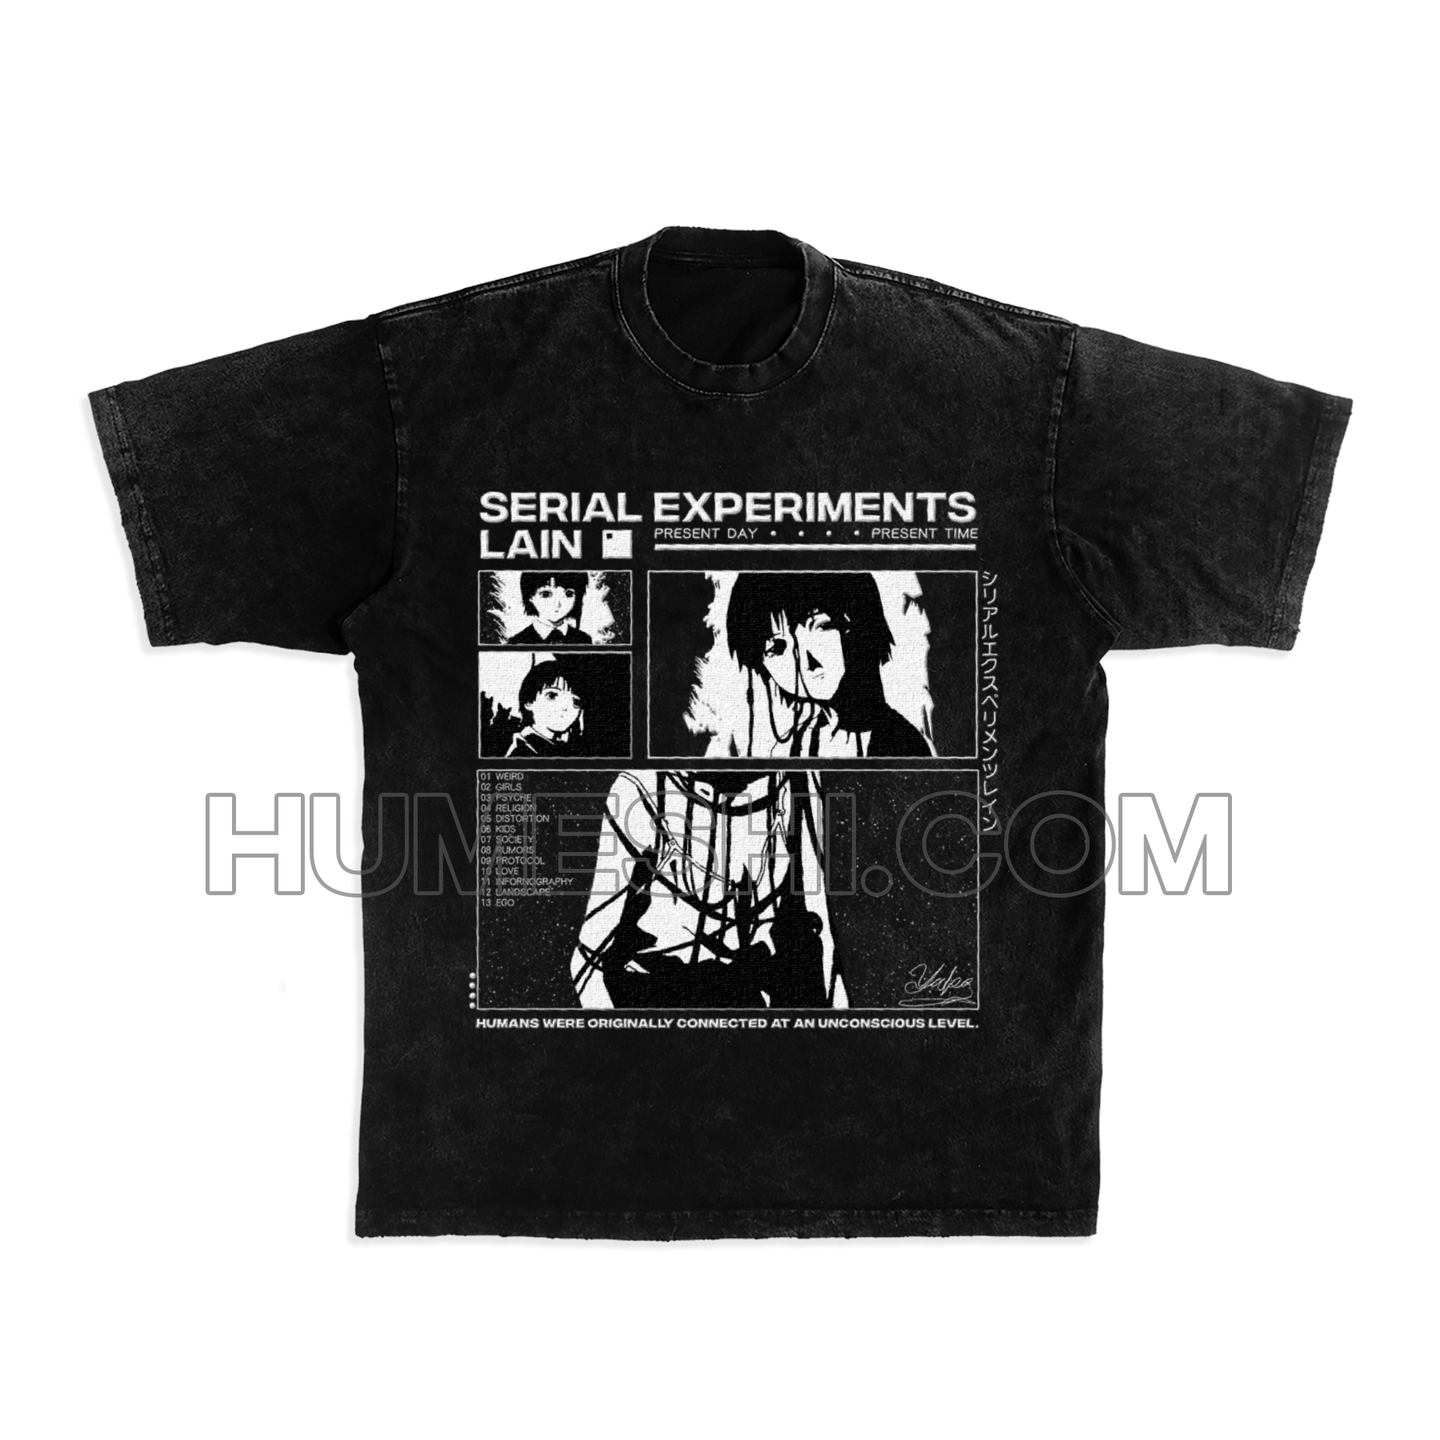 Serial Experiments Lain Shirt YL-X.02